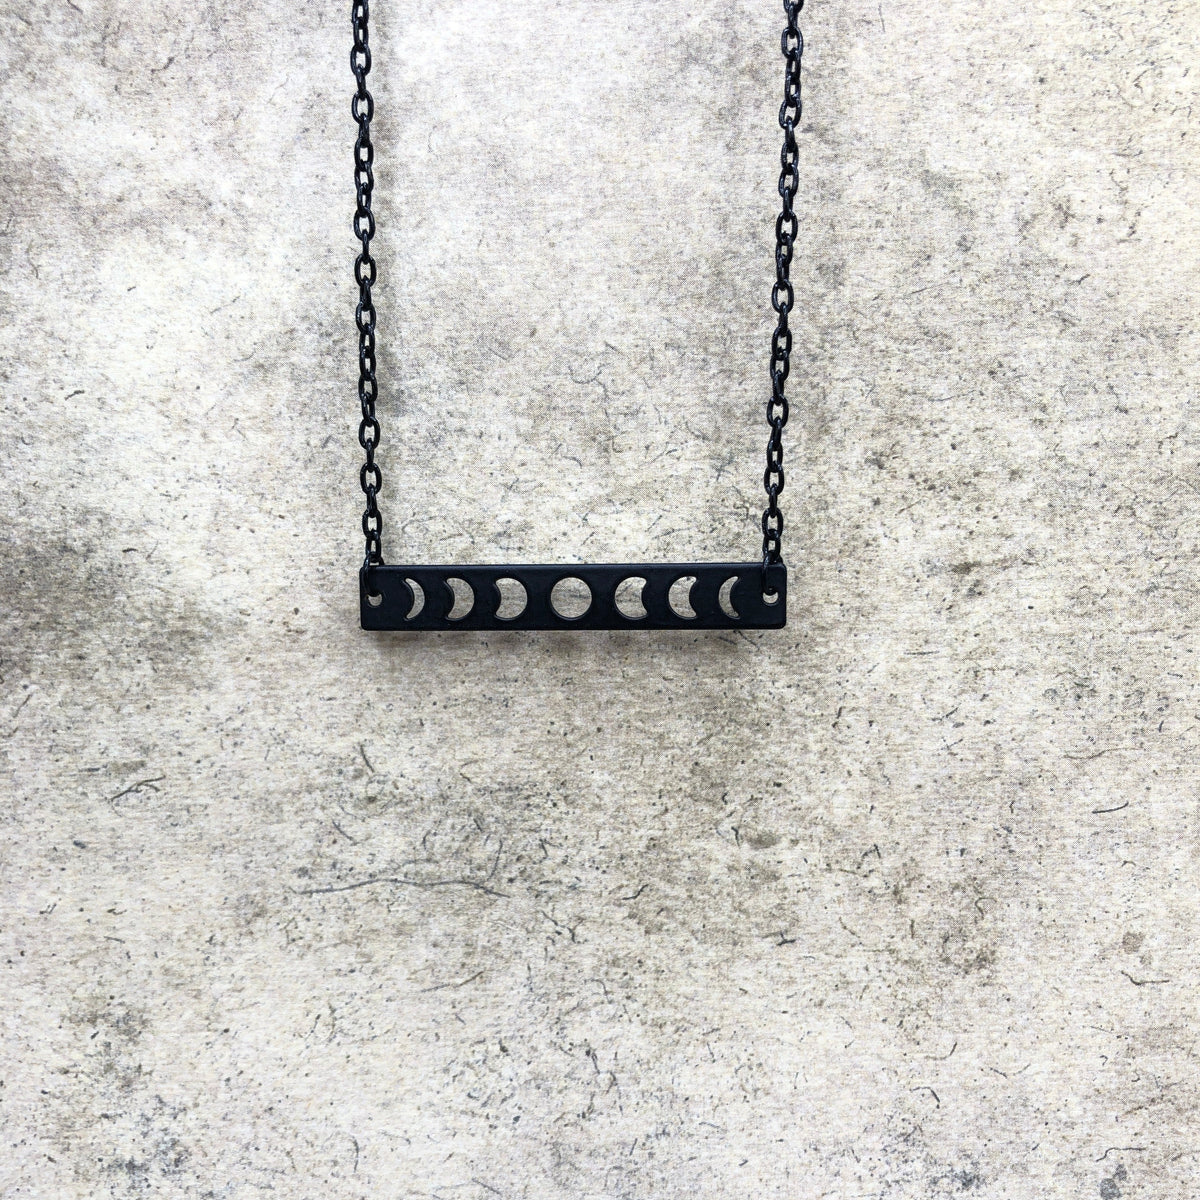 Lunar Phase Moon Phase Horizontal Bar Necklace, Crescent Moon Jewelry Witch Goth Celestial Waxing, Waning, Full Moon Phases.